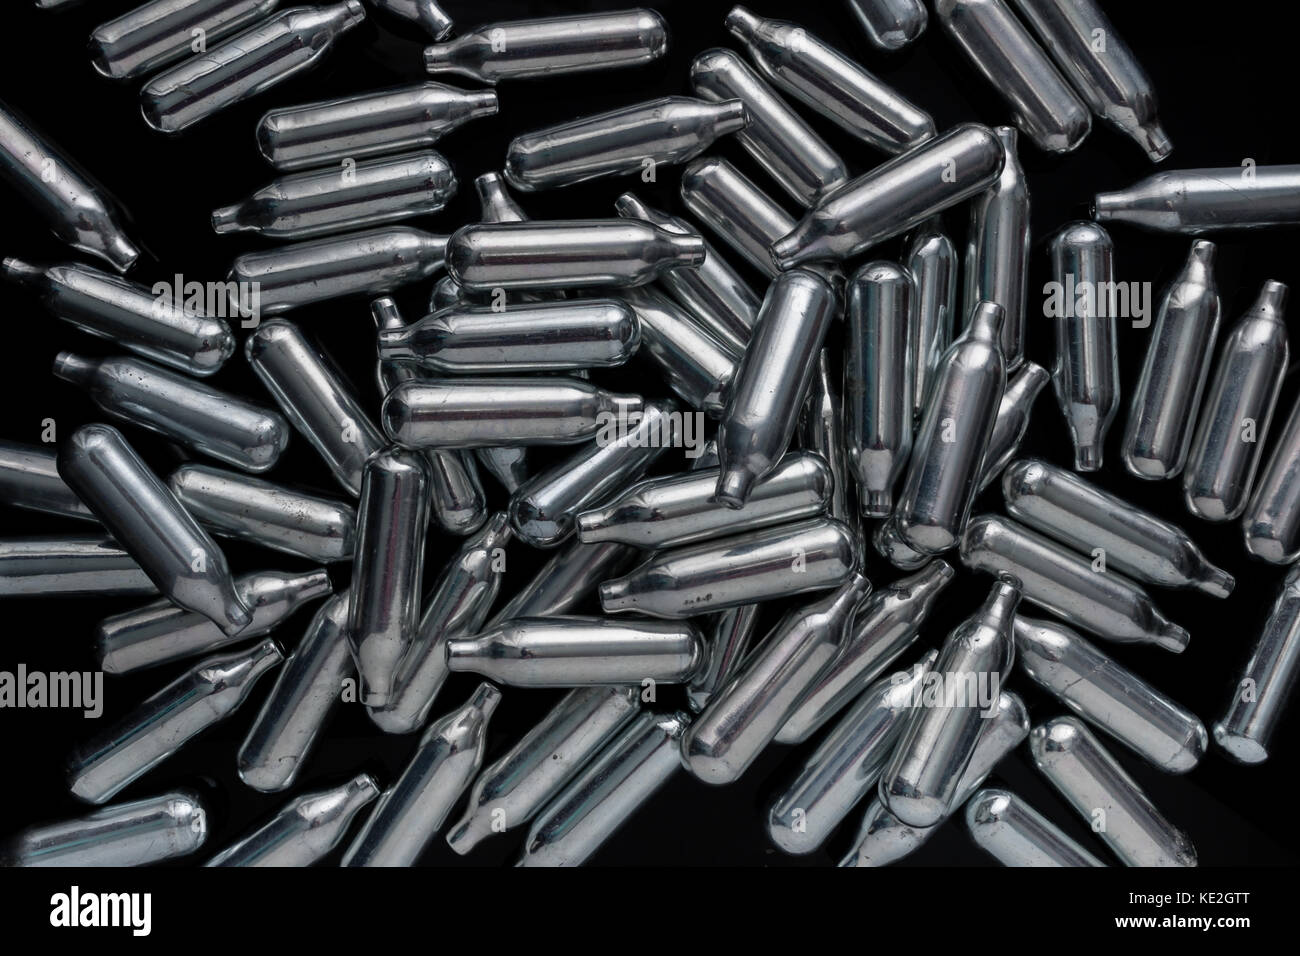 A pile of nitrous oxide canisters gathered from the street. Stock Photo